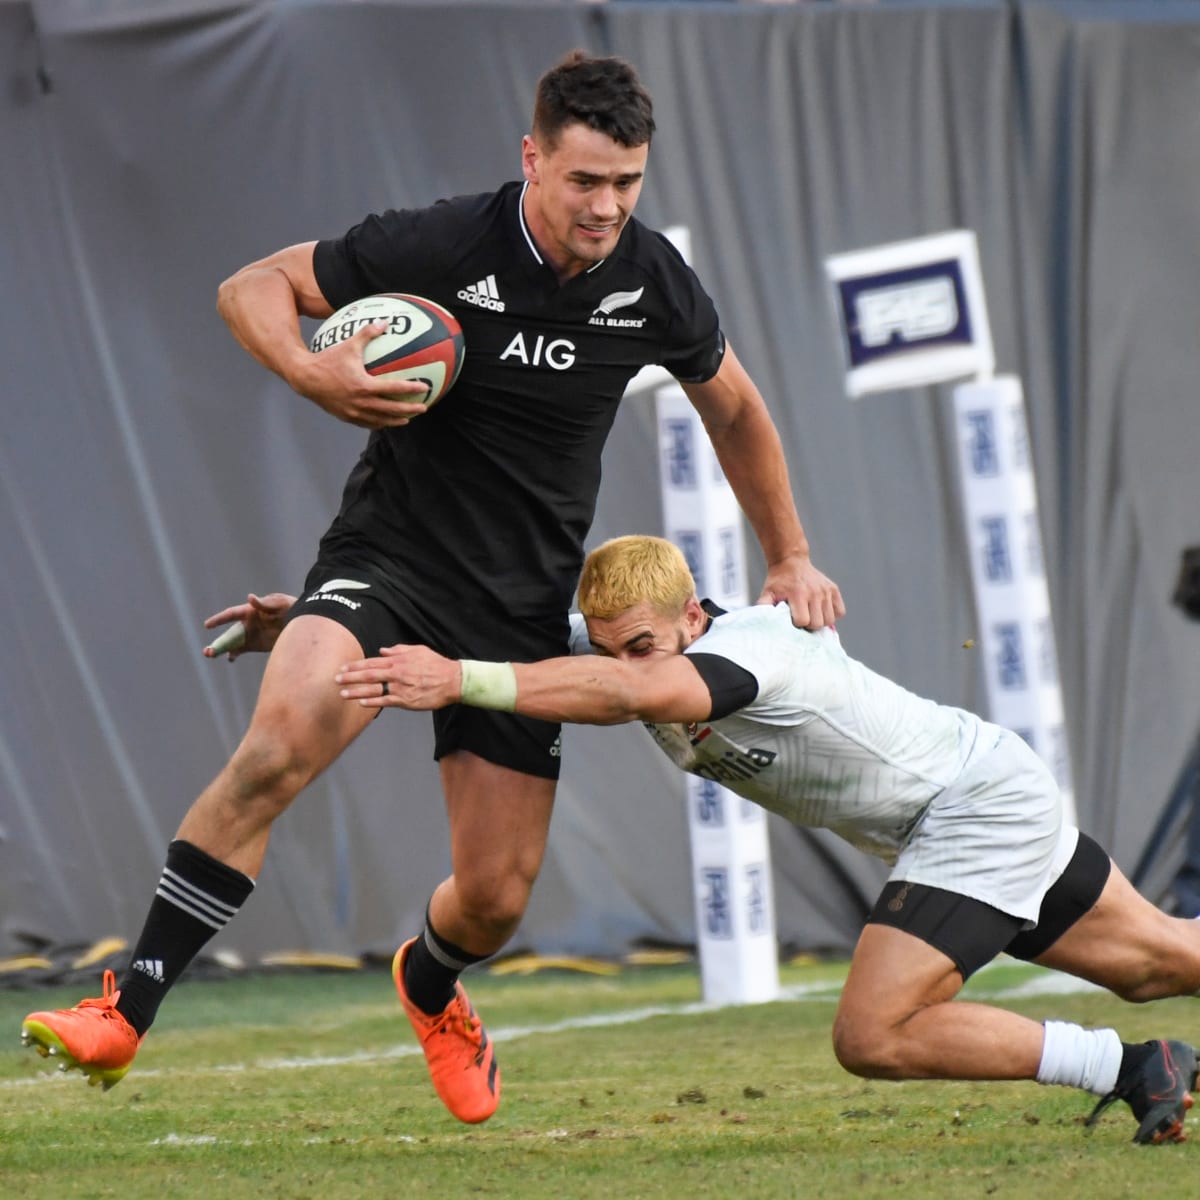 Watch Pac 12 Rugby Sevens Championship Live stream, TV channel - How to Watch and Stream Major League and College Sports